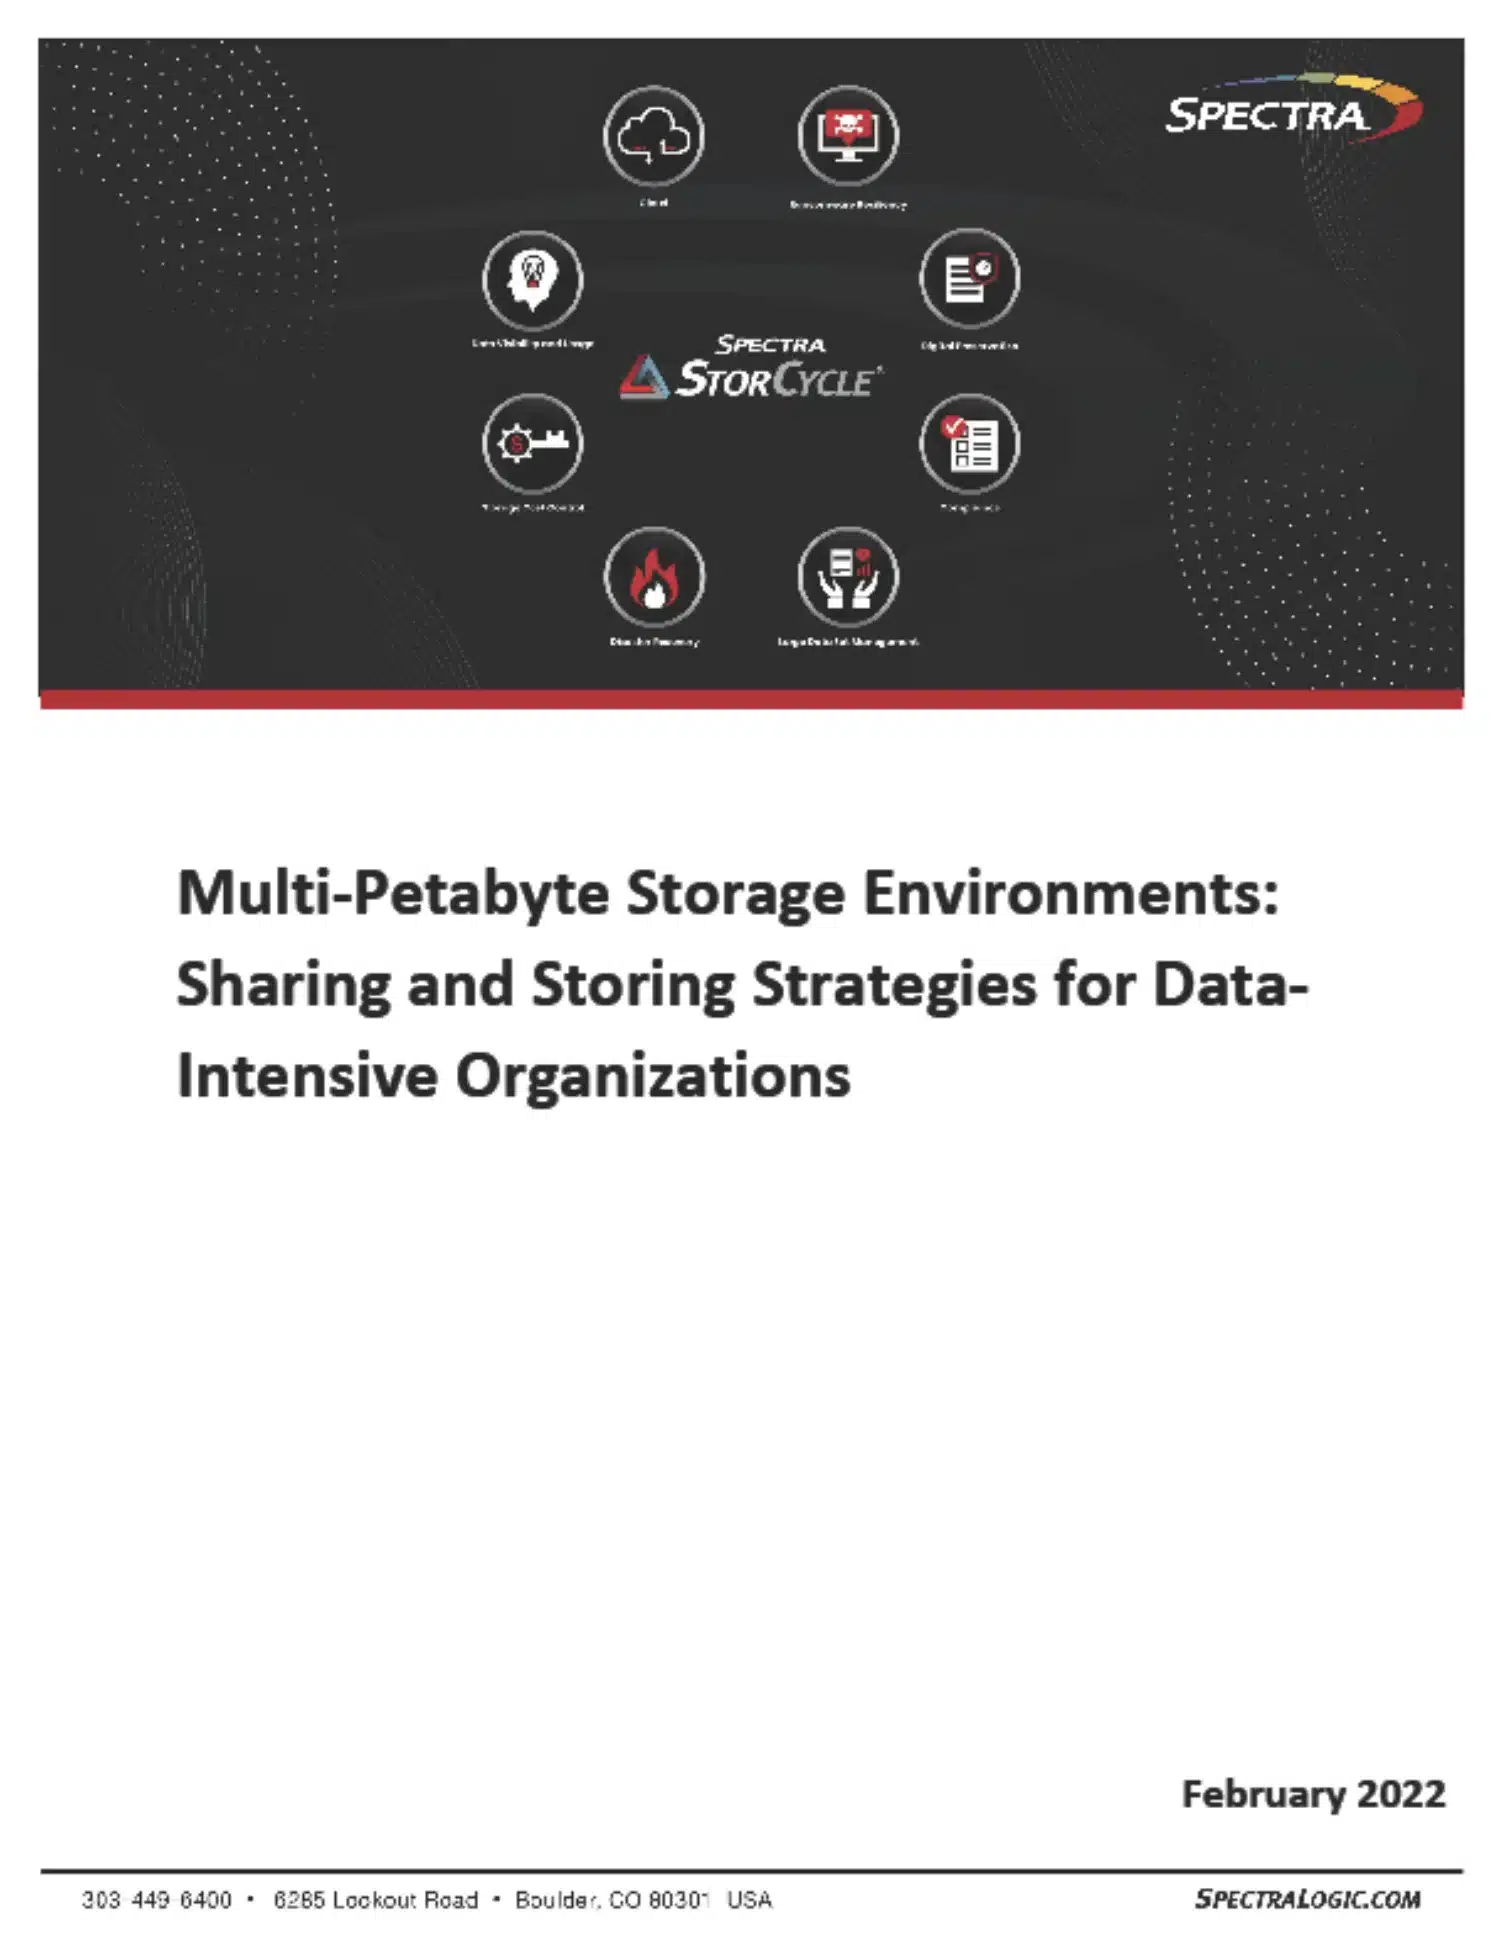 Multi-Petabyte Storage Environments: Sharing and Storing Strategies for Data- Intensive Organizations